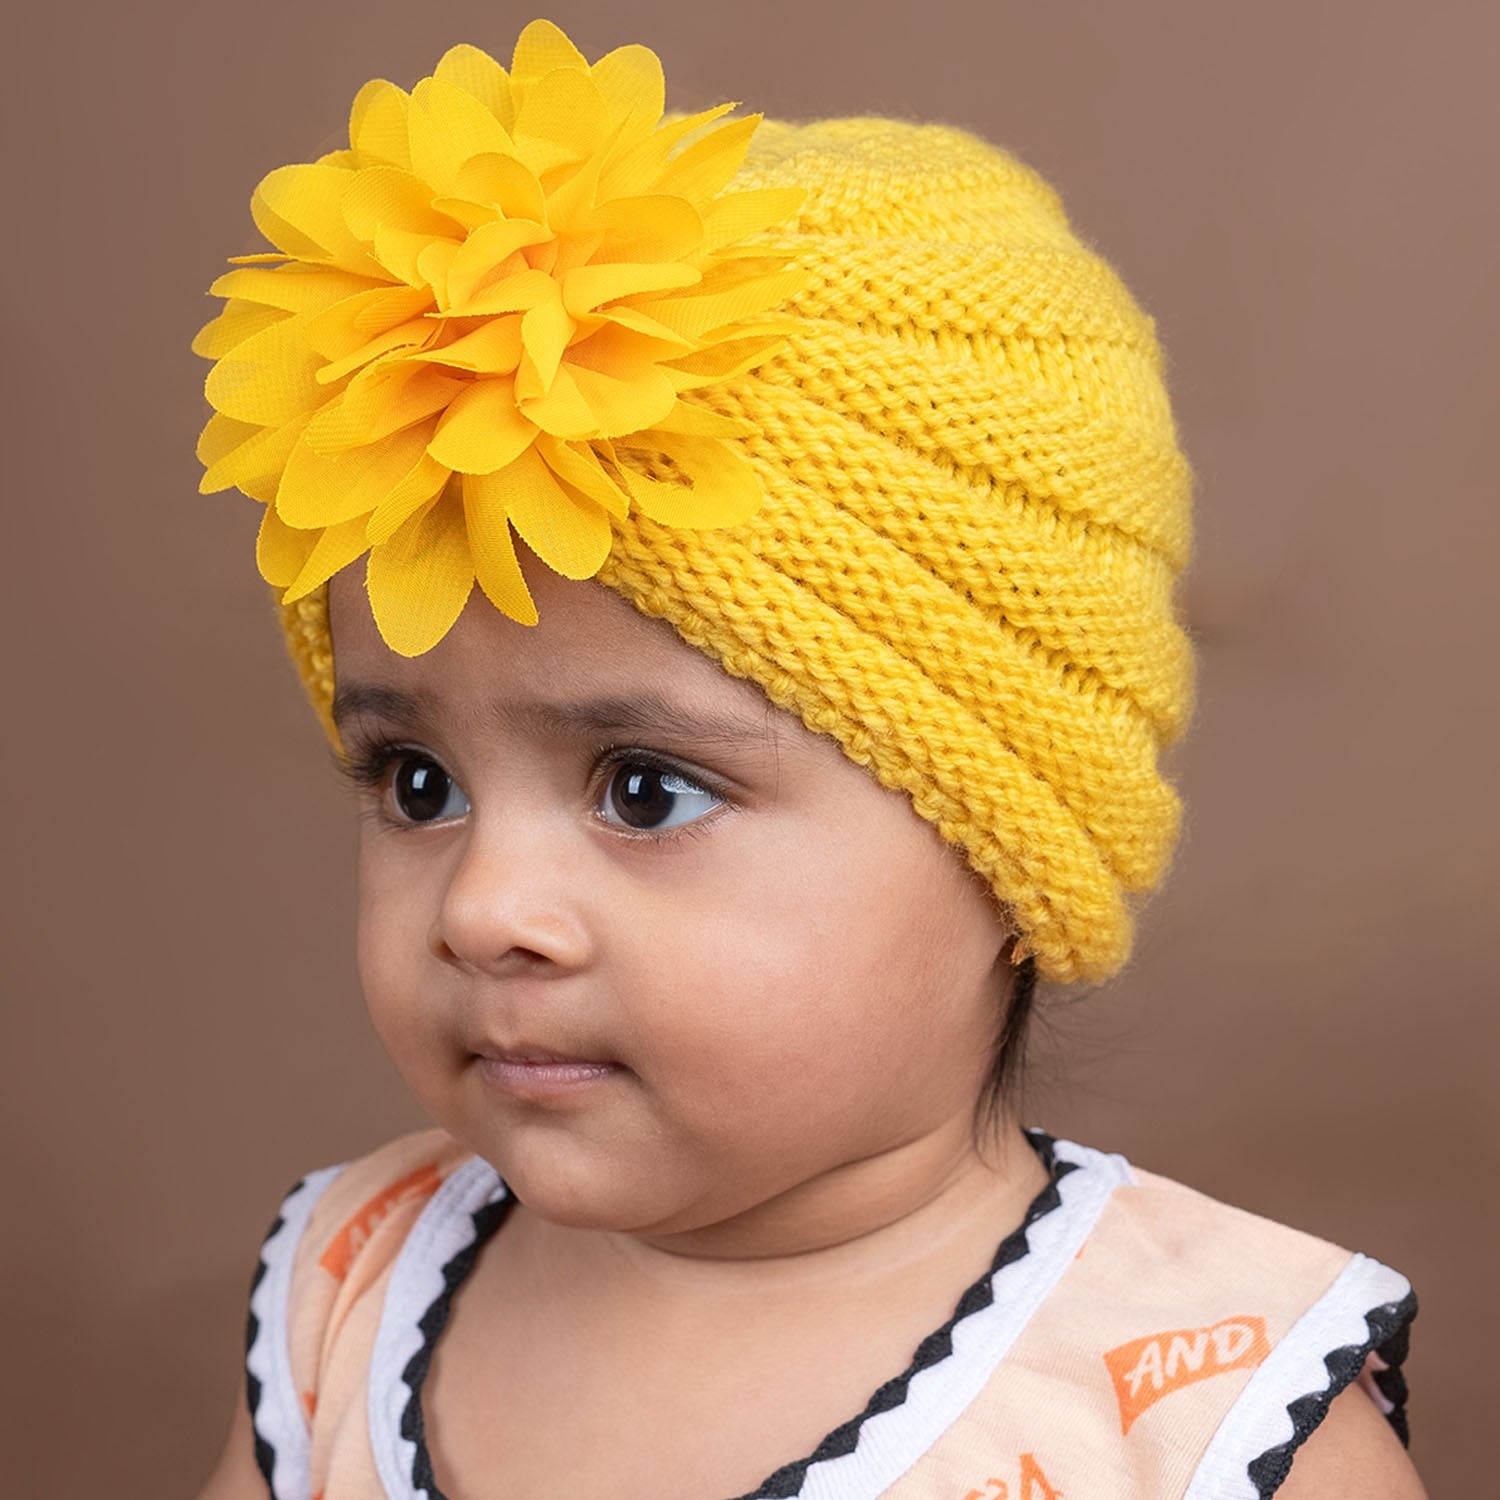 Baby Moo Girls Floral Petals 2 Pack Knitted Turban Caps - Yellow, Pink